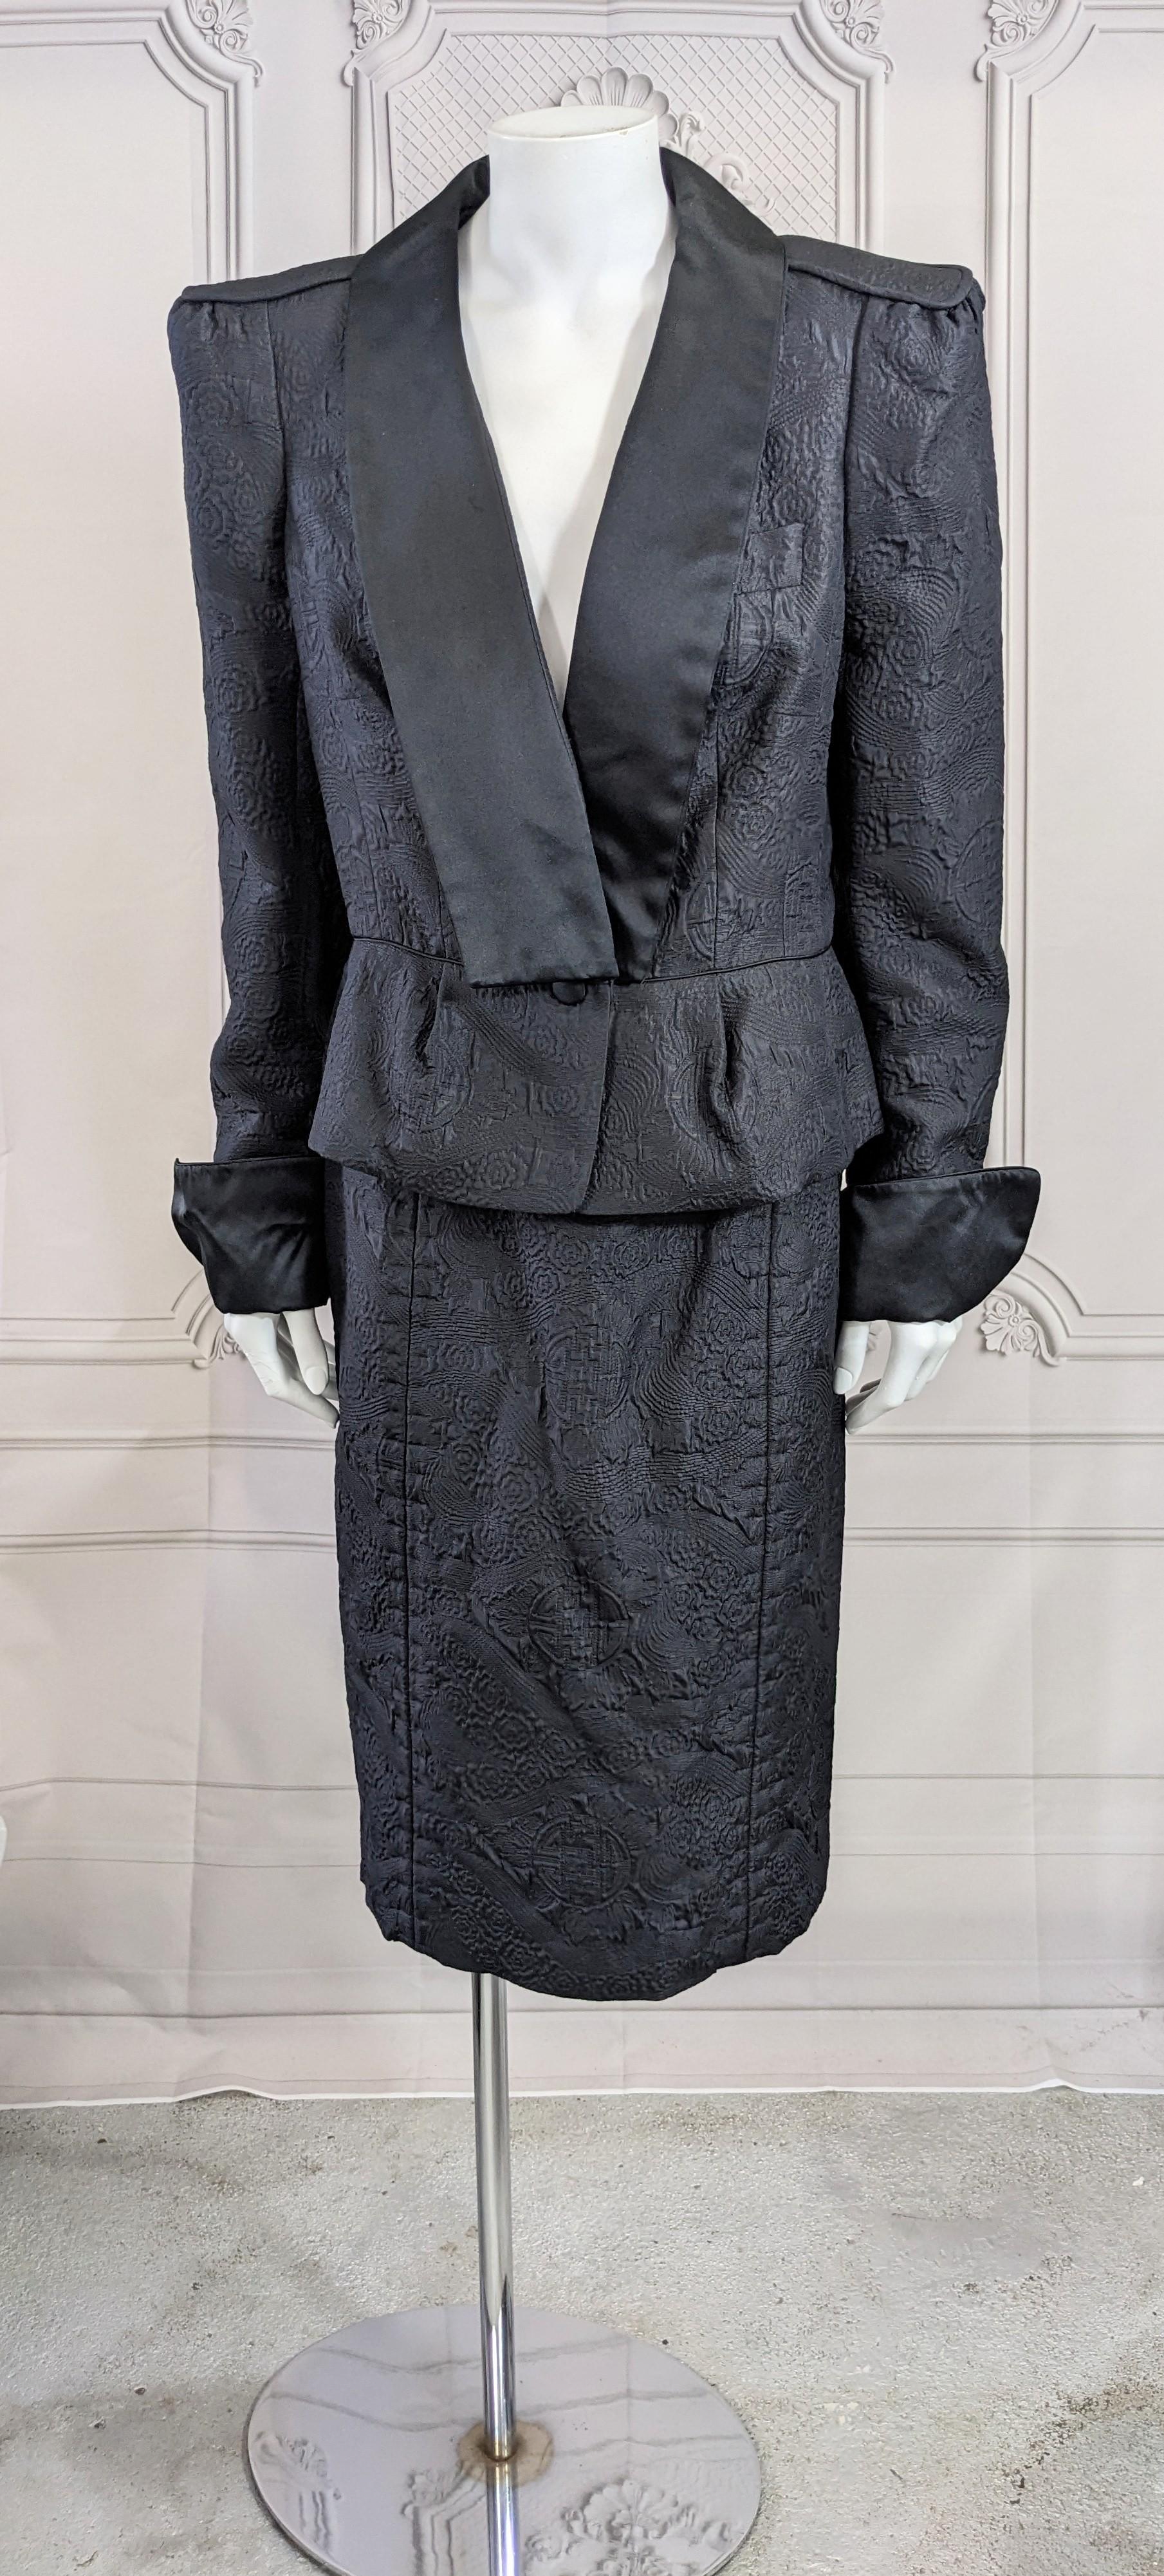 Yves Saint Laurent Rive Gauche by Tom Ford Chinese Collection Suit F/W 2004. Matelasse quilted wool/silk custom textile with Chinese symbols are paired with black silk satin in a homage to traditional Chinese combinations. 
Jacket has extended